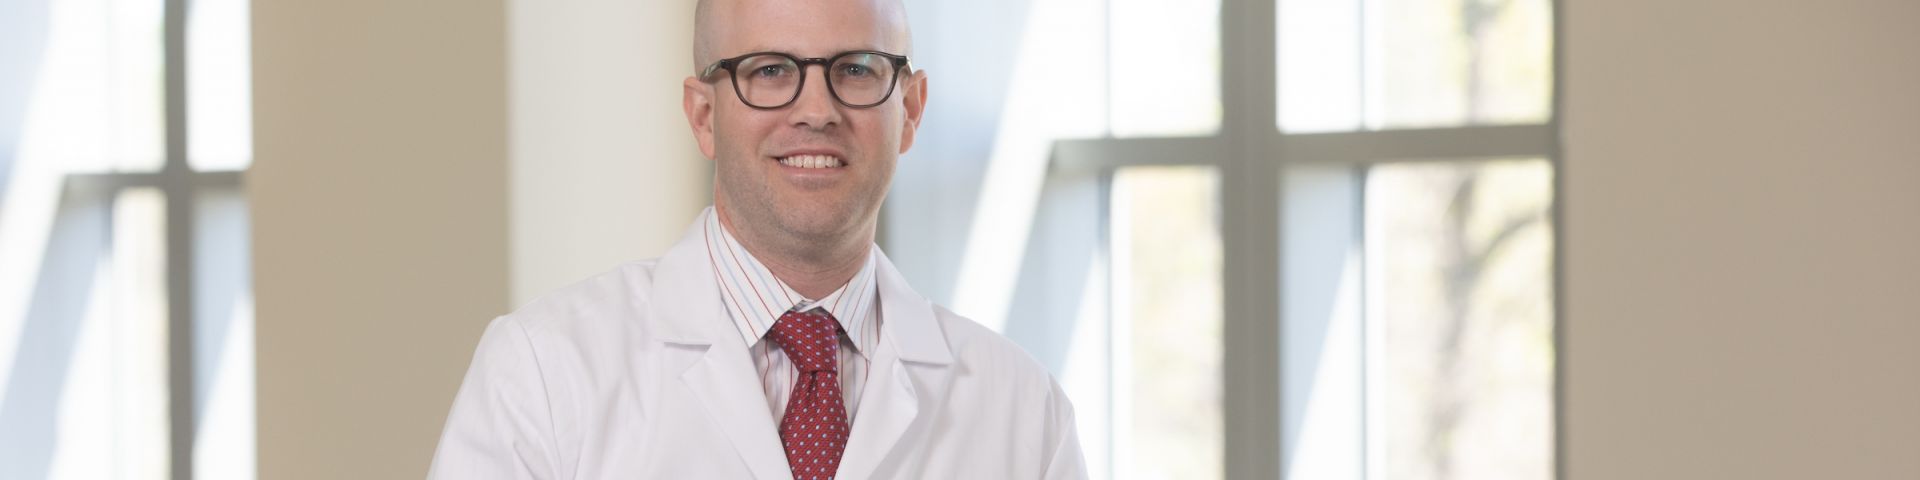 Christopher Keel, D.O., a urologist at USA Health University Urology, recently performed the first prostatectomy using the da Vinci SP (single port).